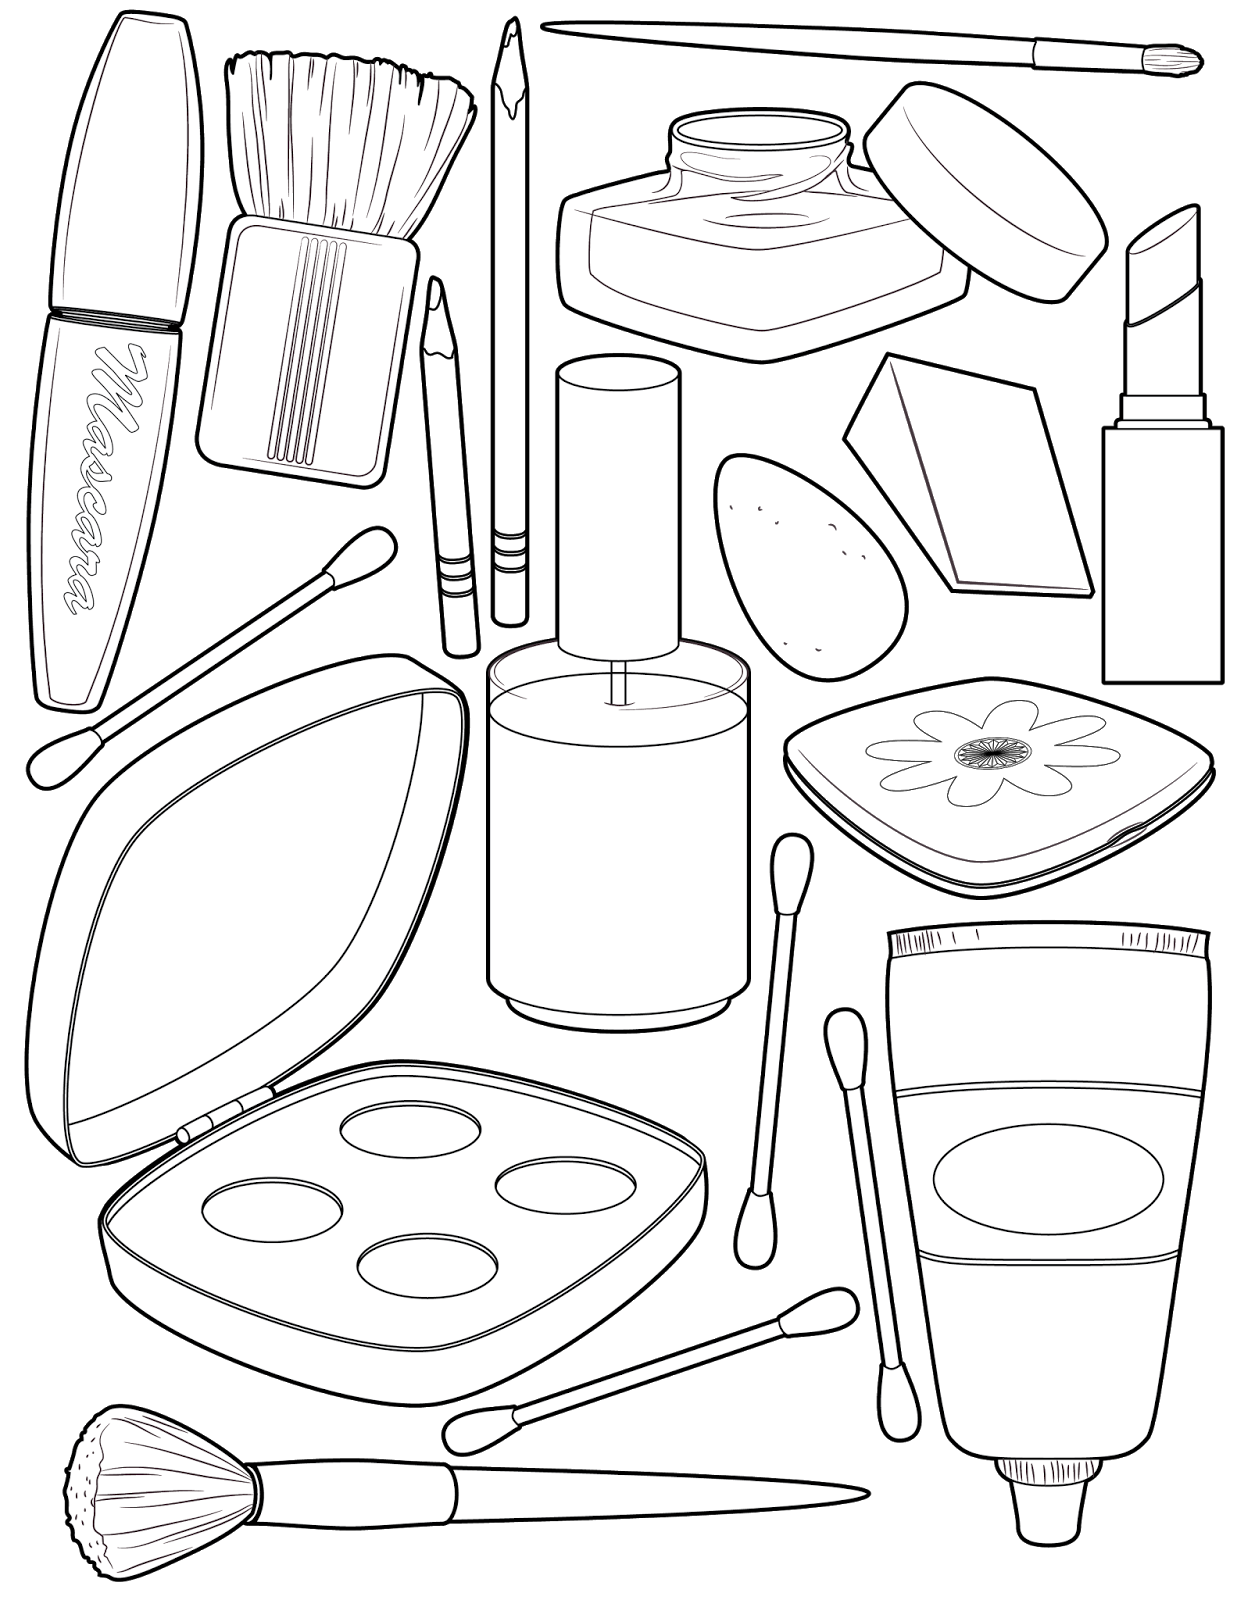 Hottest no cost makeup coloring pages ideas the attractive factor pertaining to shading isâ coloring pages for girls coloring pages for kids cute coloring pages